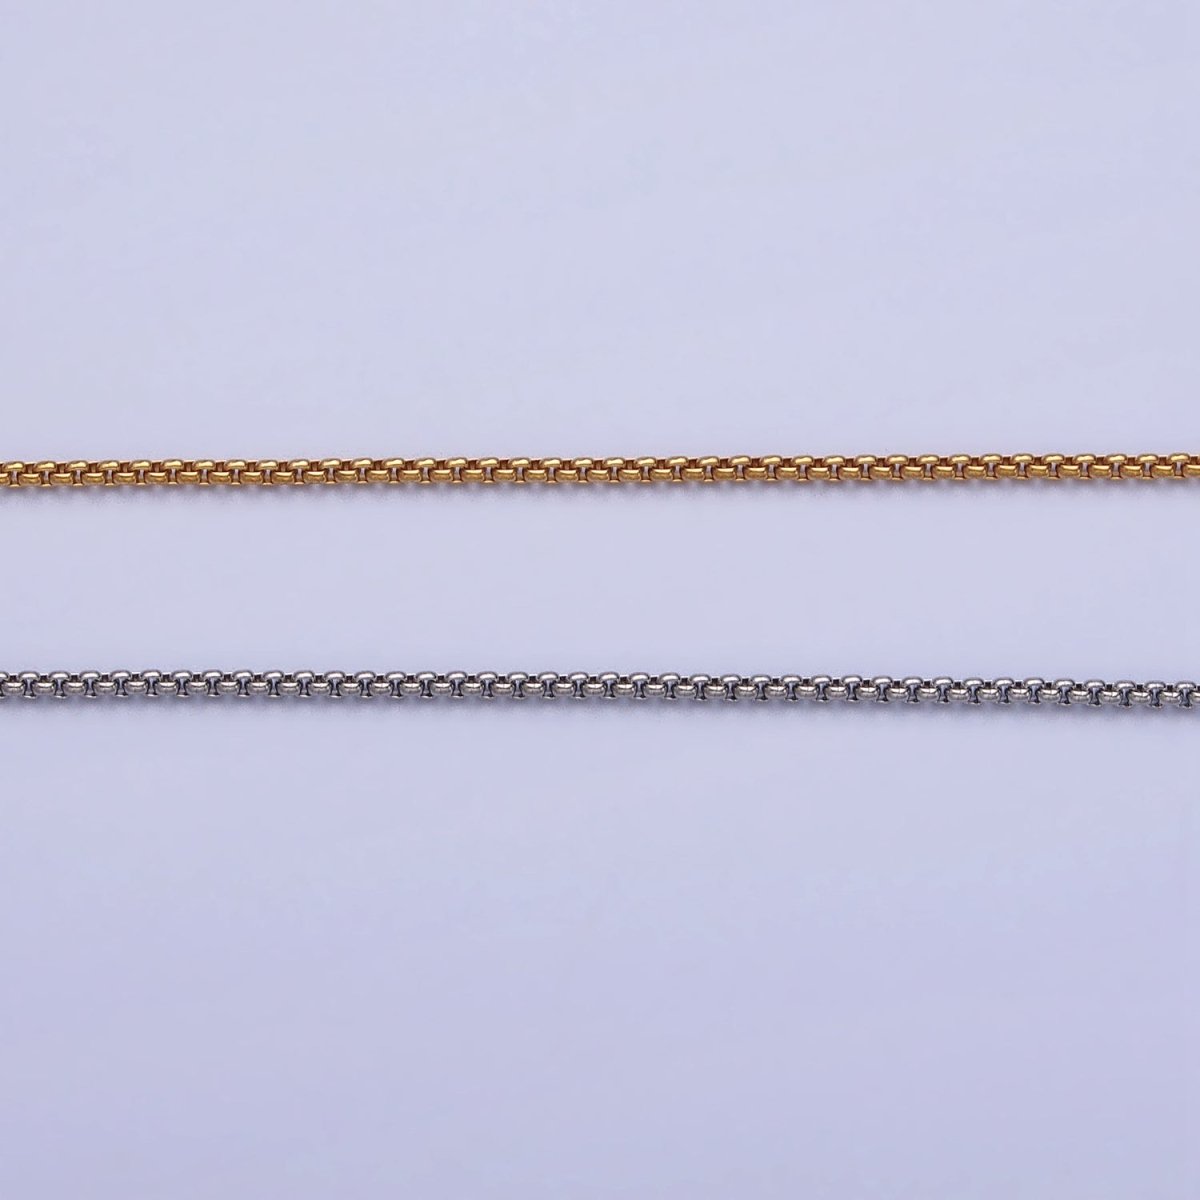 Dainty Stainless Steel Cable Rolo Chain Necklace 1.2mm Thin Dark Gold Box Chain 17.7 inches for Jewelry Making | WA-1703 WA-1704 Clearance Pricing - DLUXCA